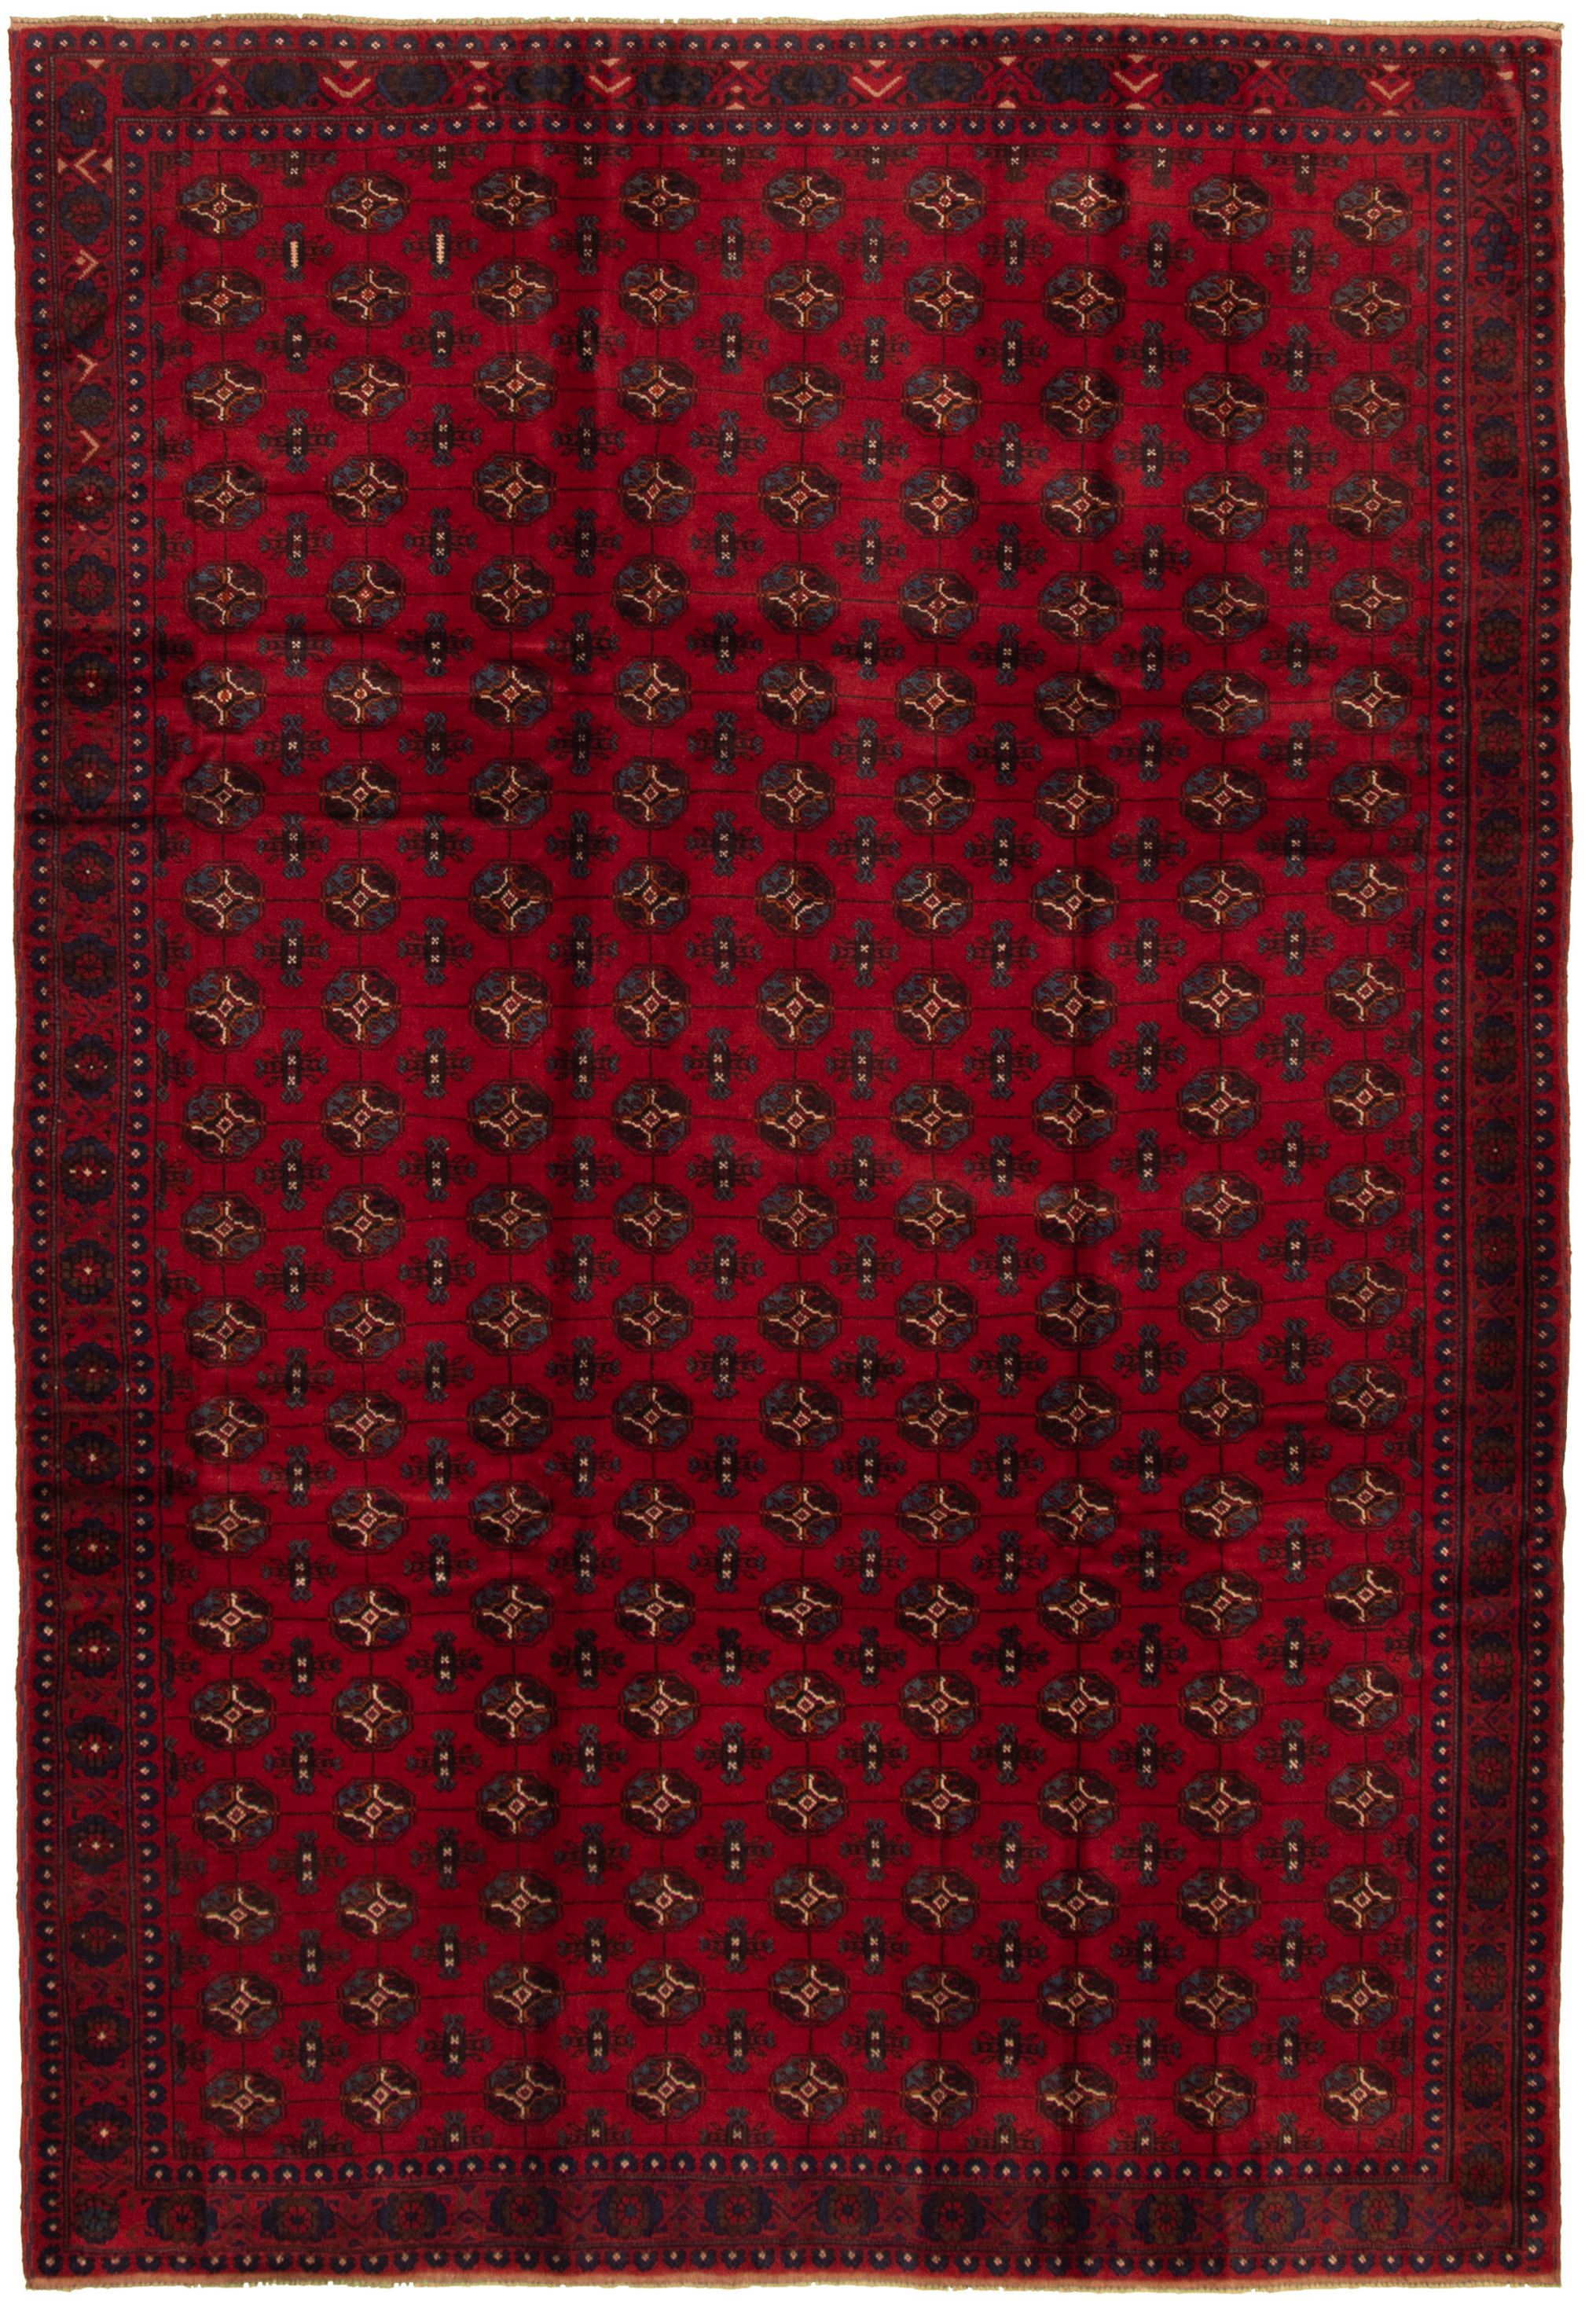 Hand-knotted Rizbaft Red Wool Rug 6'5" x 9'7" Size: 6'5" x 9'7"  